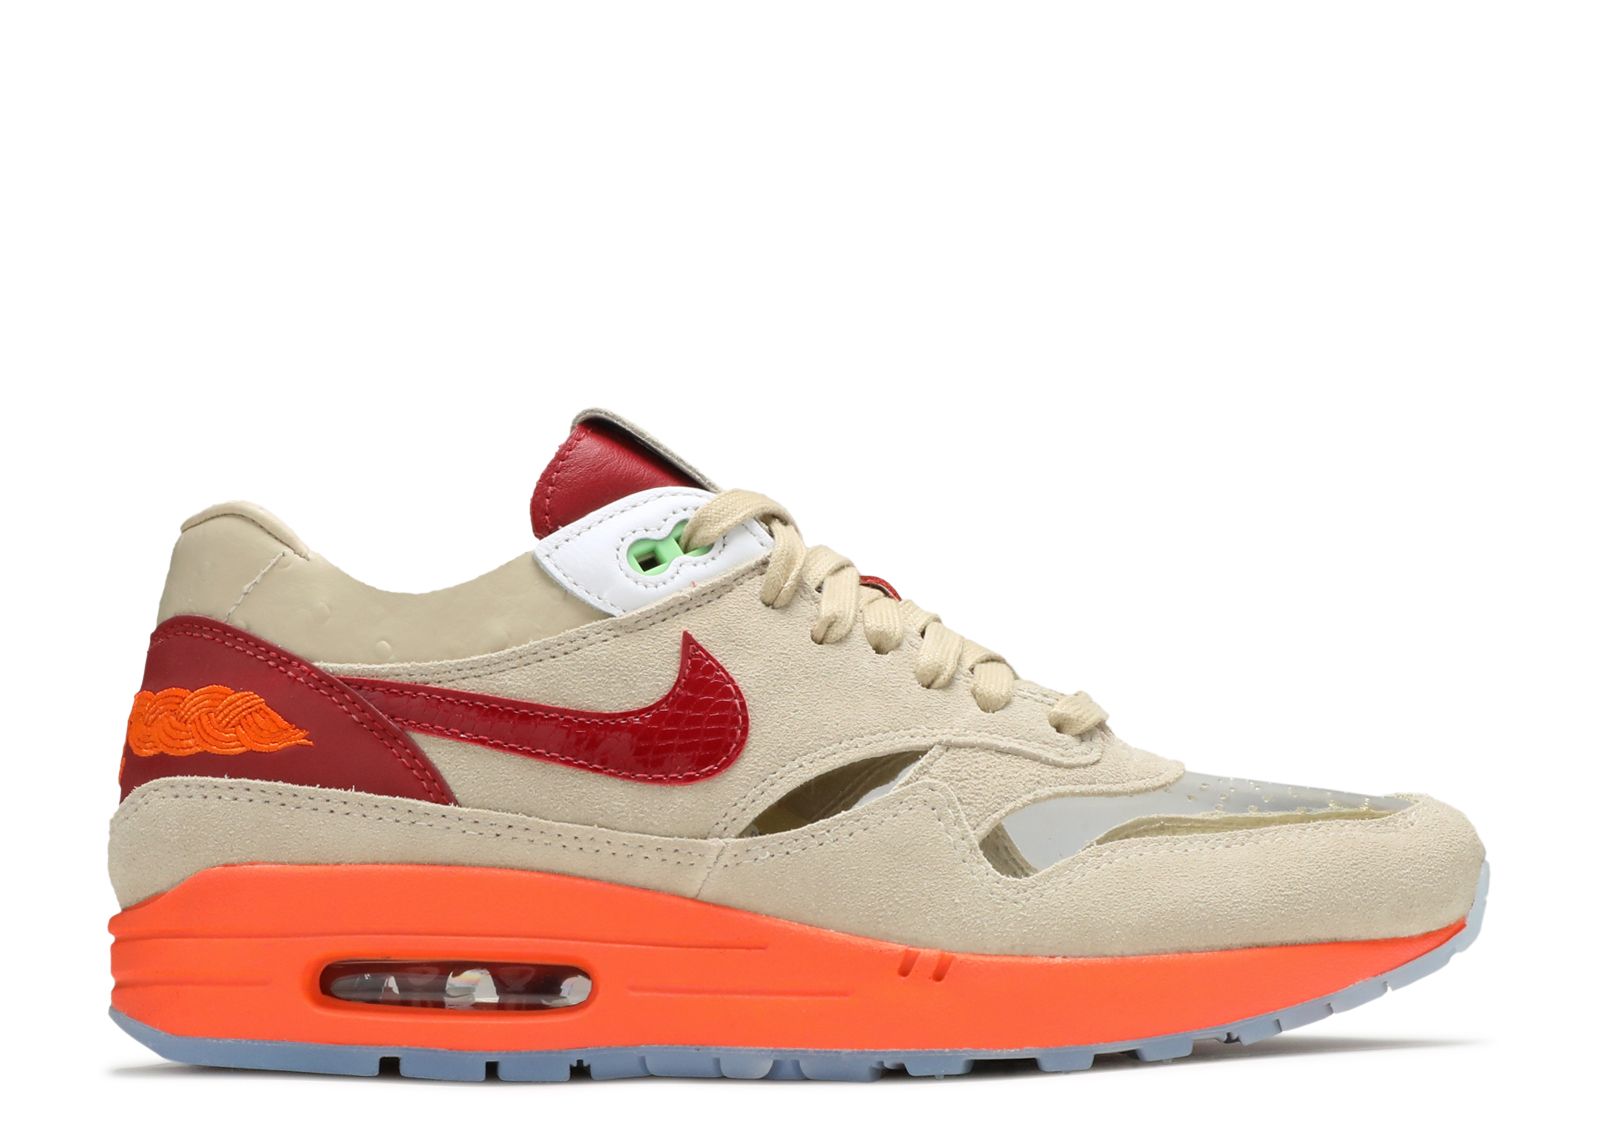 Mansion basic Sovereign Nike Air Max 1 Sneakers | Flight Club